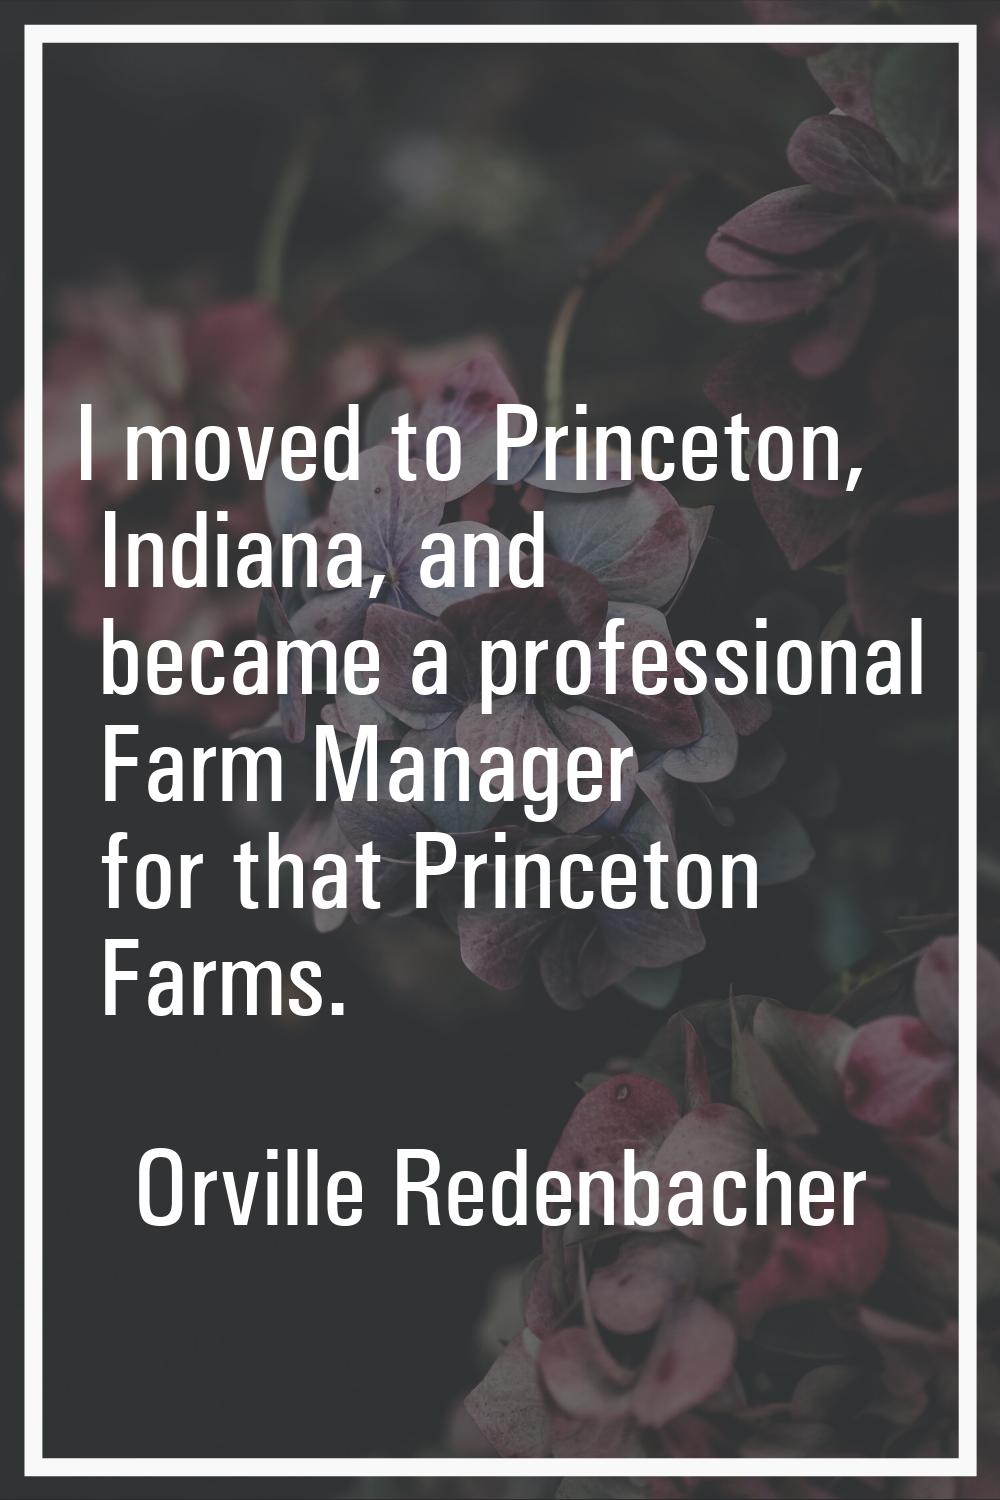 I moved to Princeton, Indiana, and became a professional Farm Manager for that Princeton Farms.